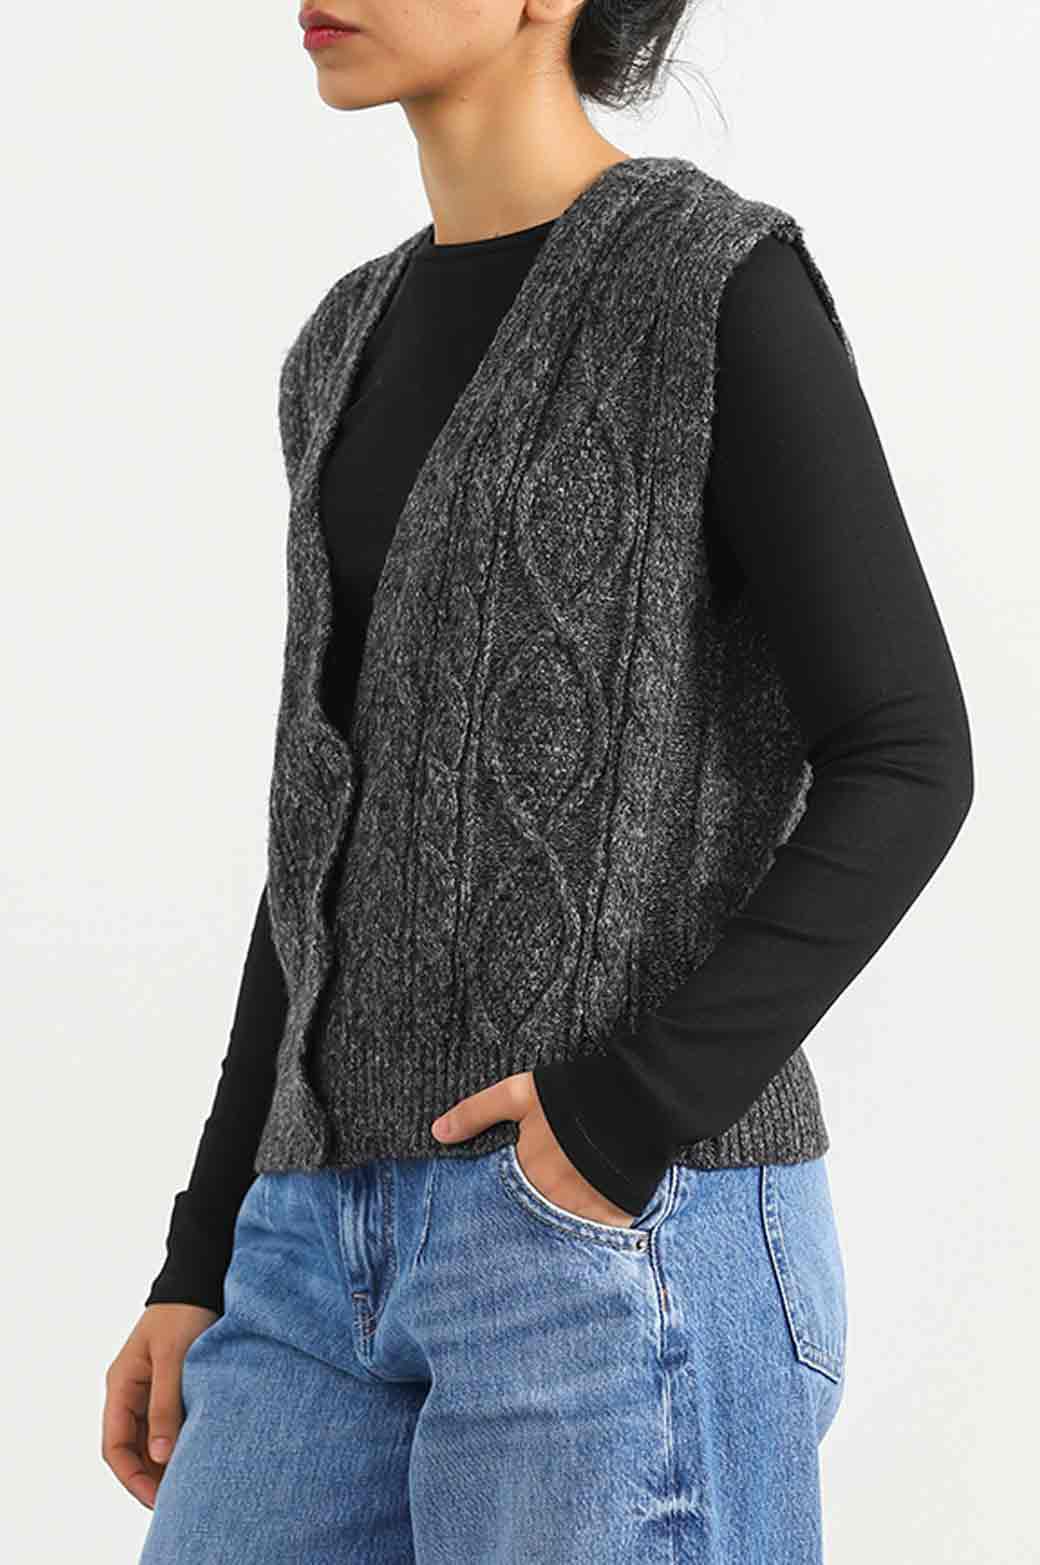 GRAY CABLE-KNIT CARDIGAN VEST